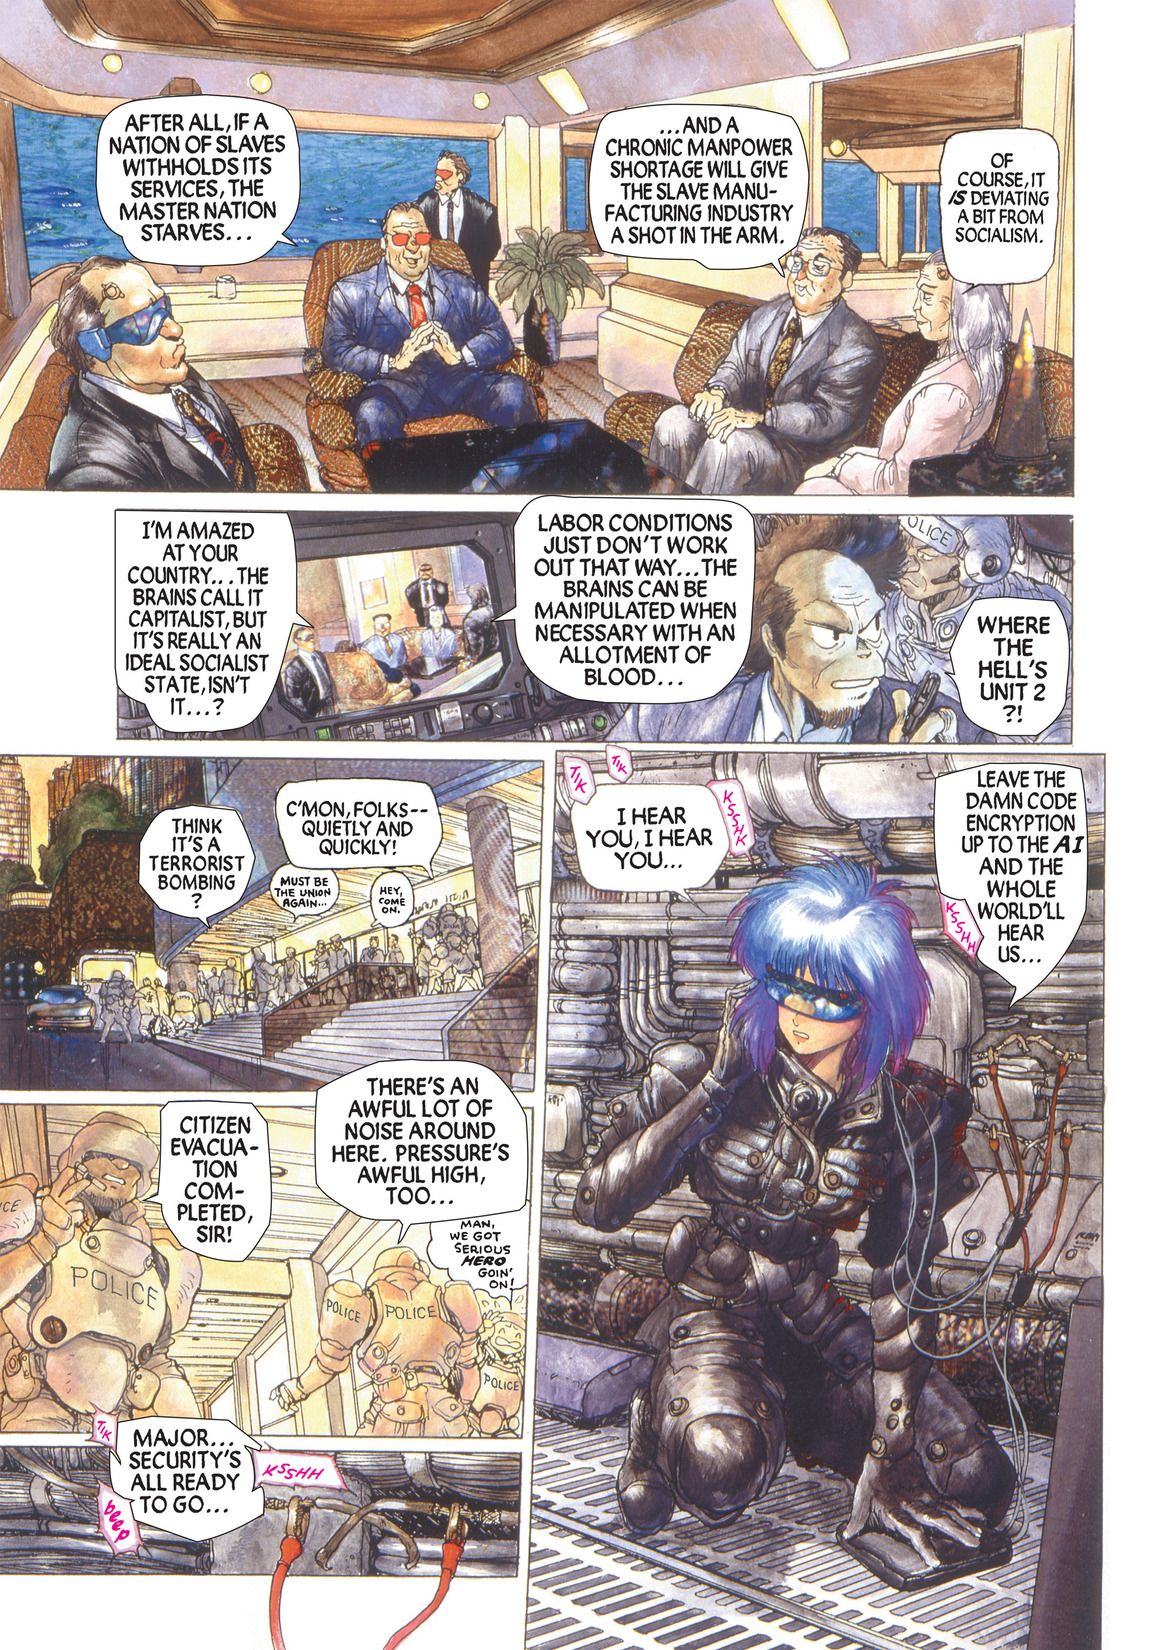 Appleseed, Vol. 1 by Masamune Shirow